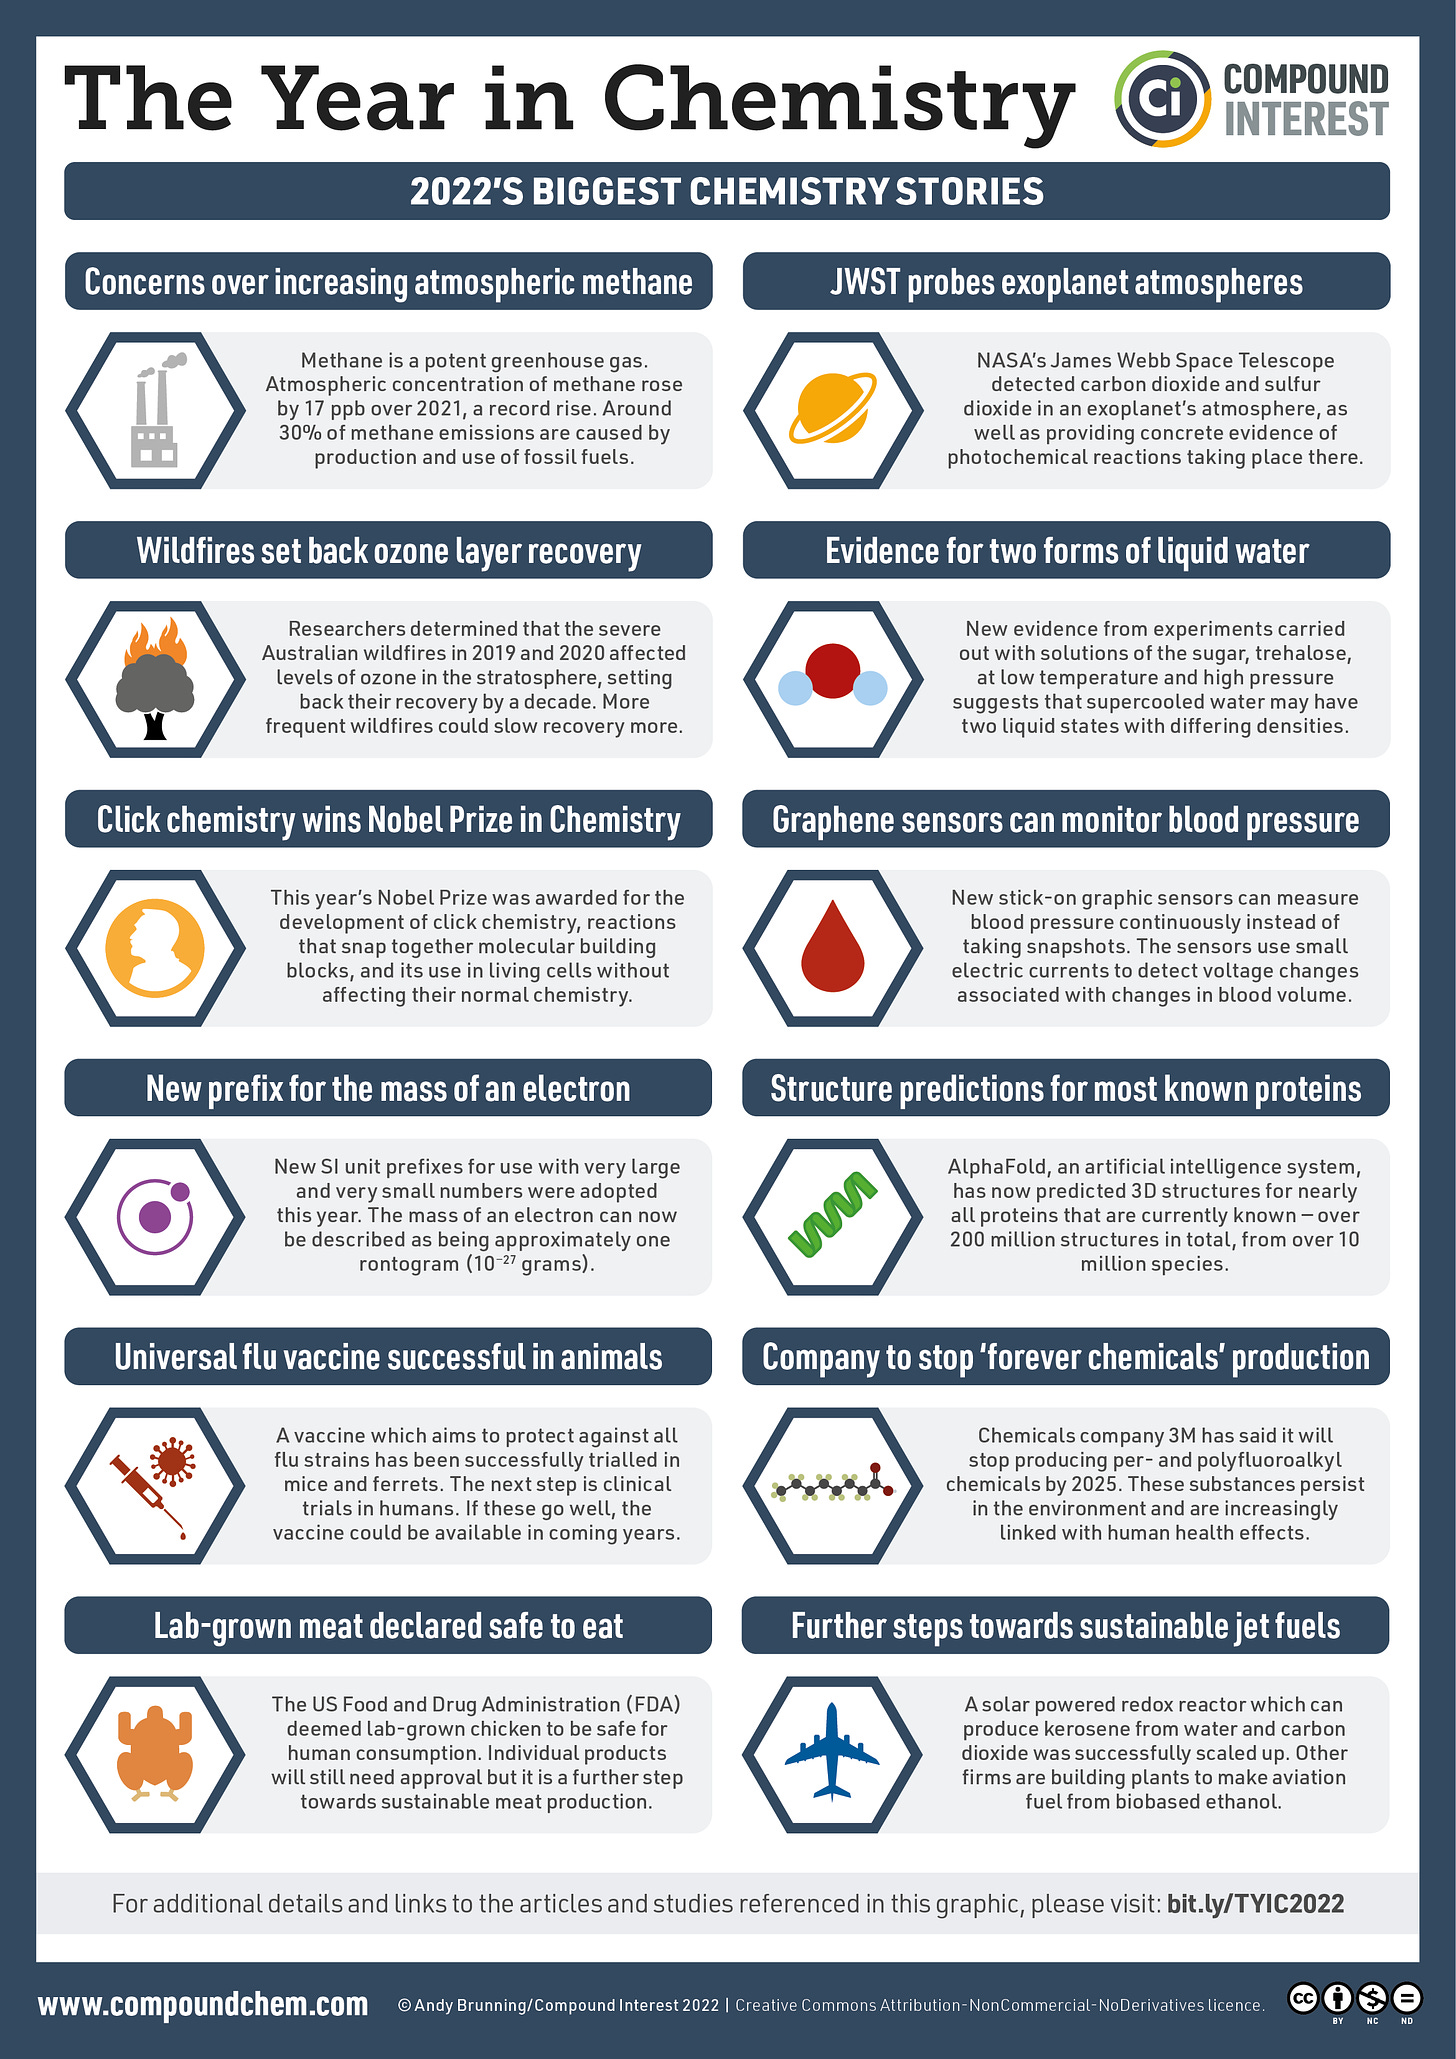 Infographic summarising twelve significant chemistry stories from 2022. More detail on each is provided in the text of the post below.